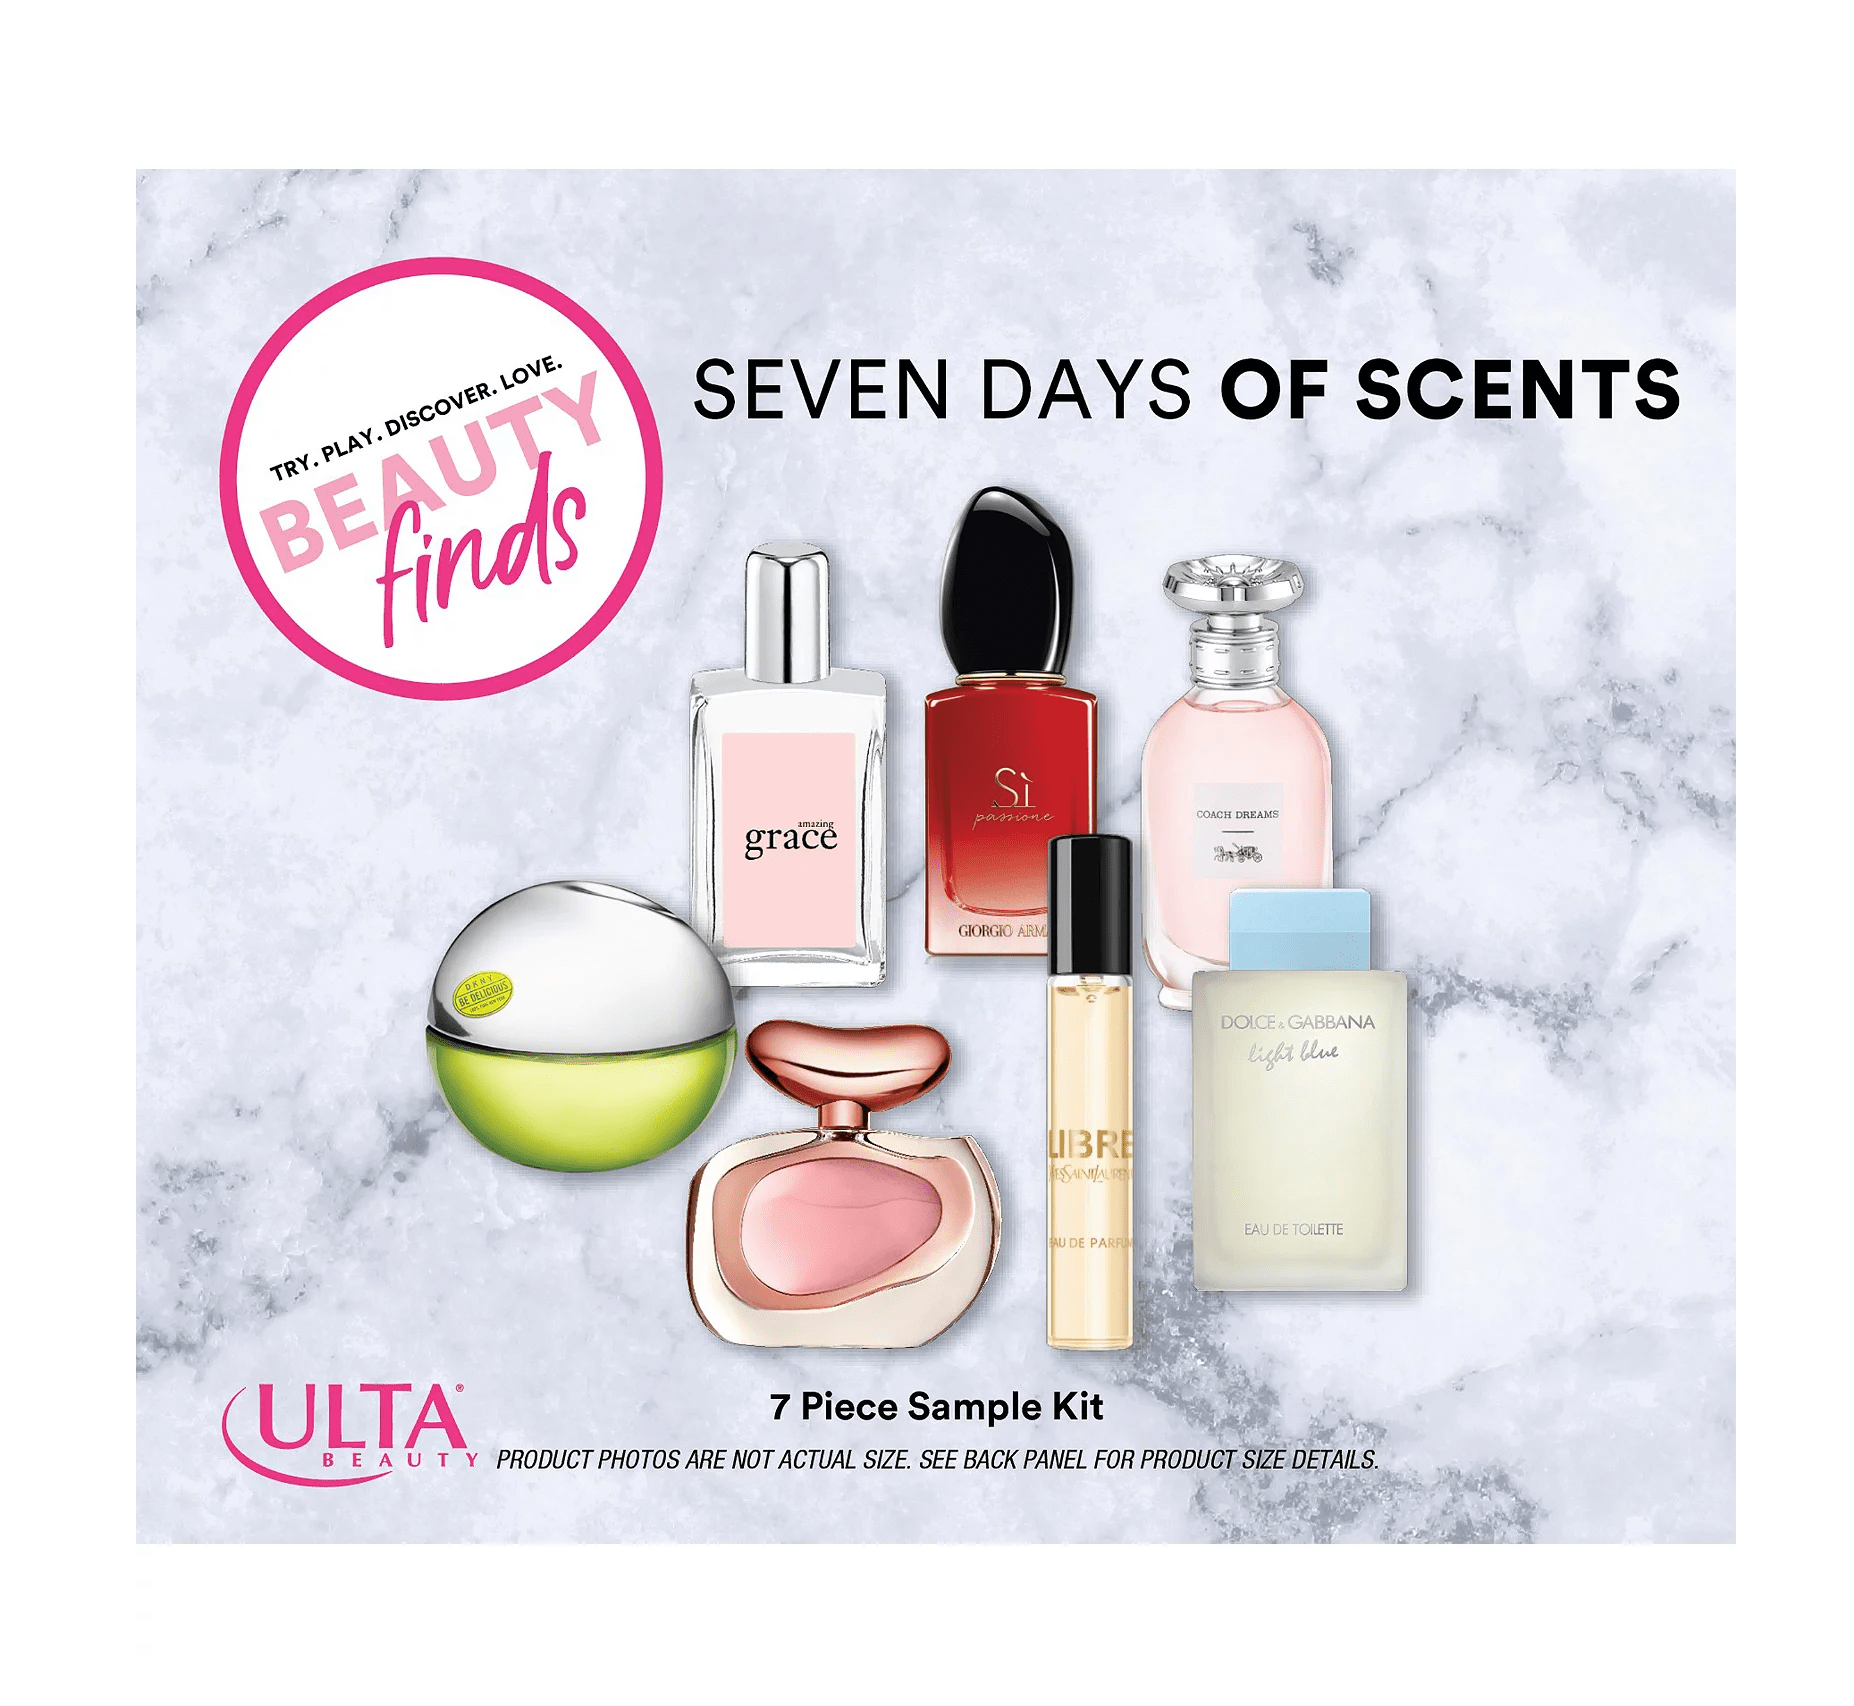 New Ulta Sample Kit Available Now Seven Days of Scents Sample Kit